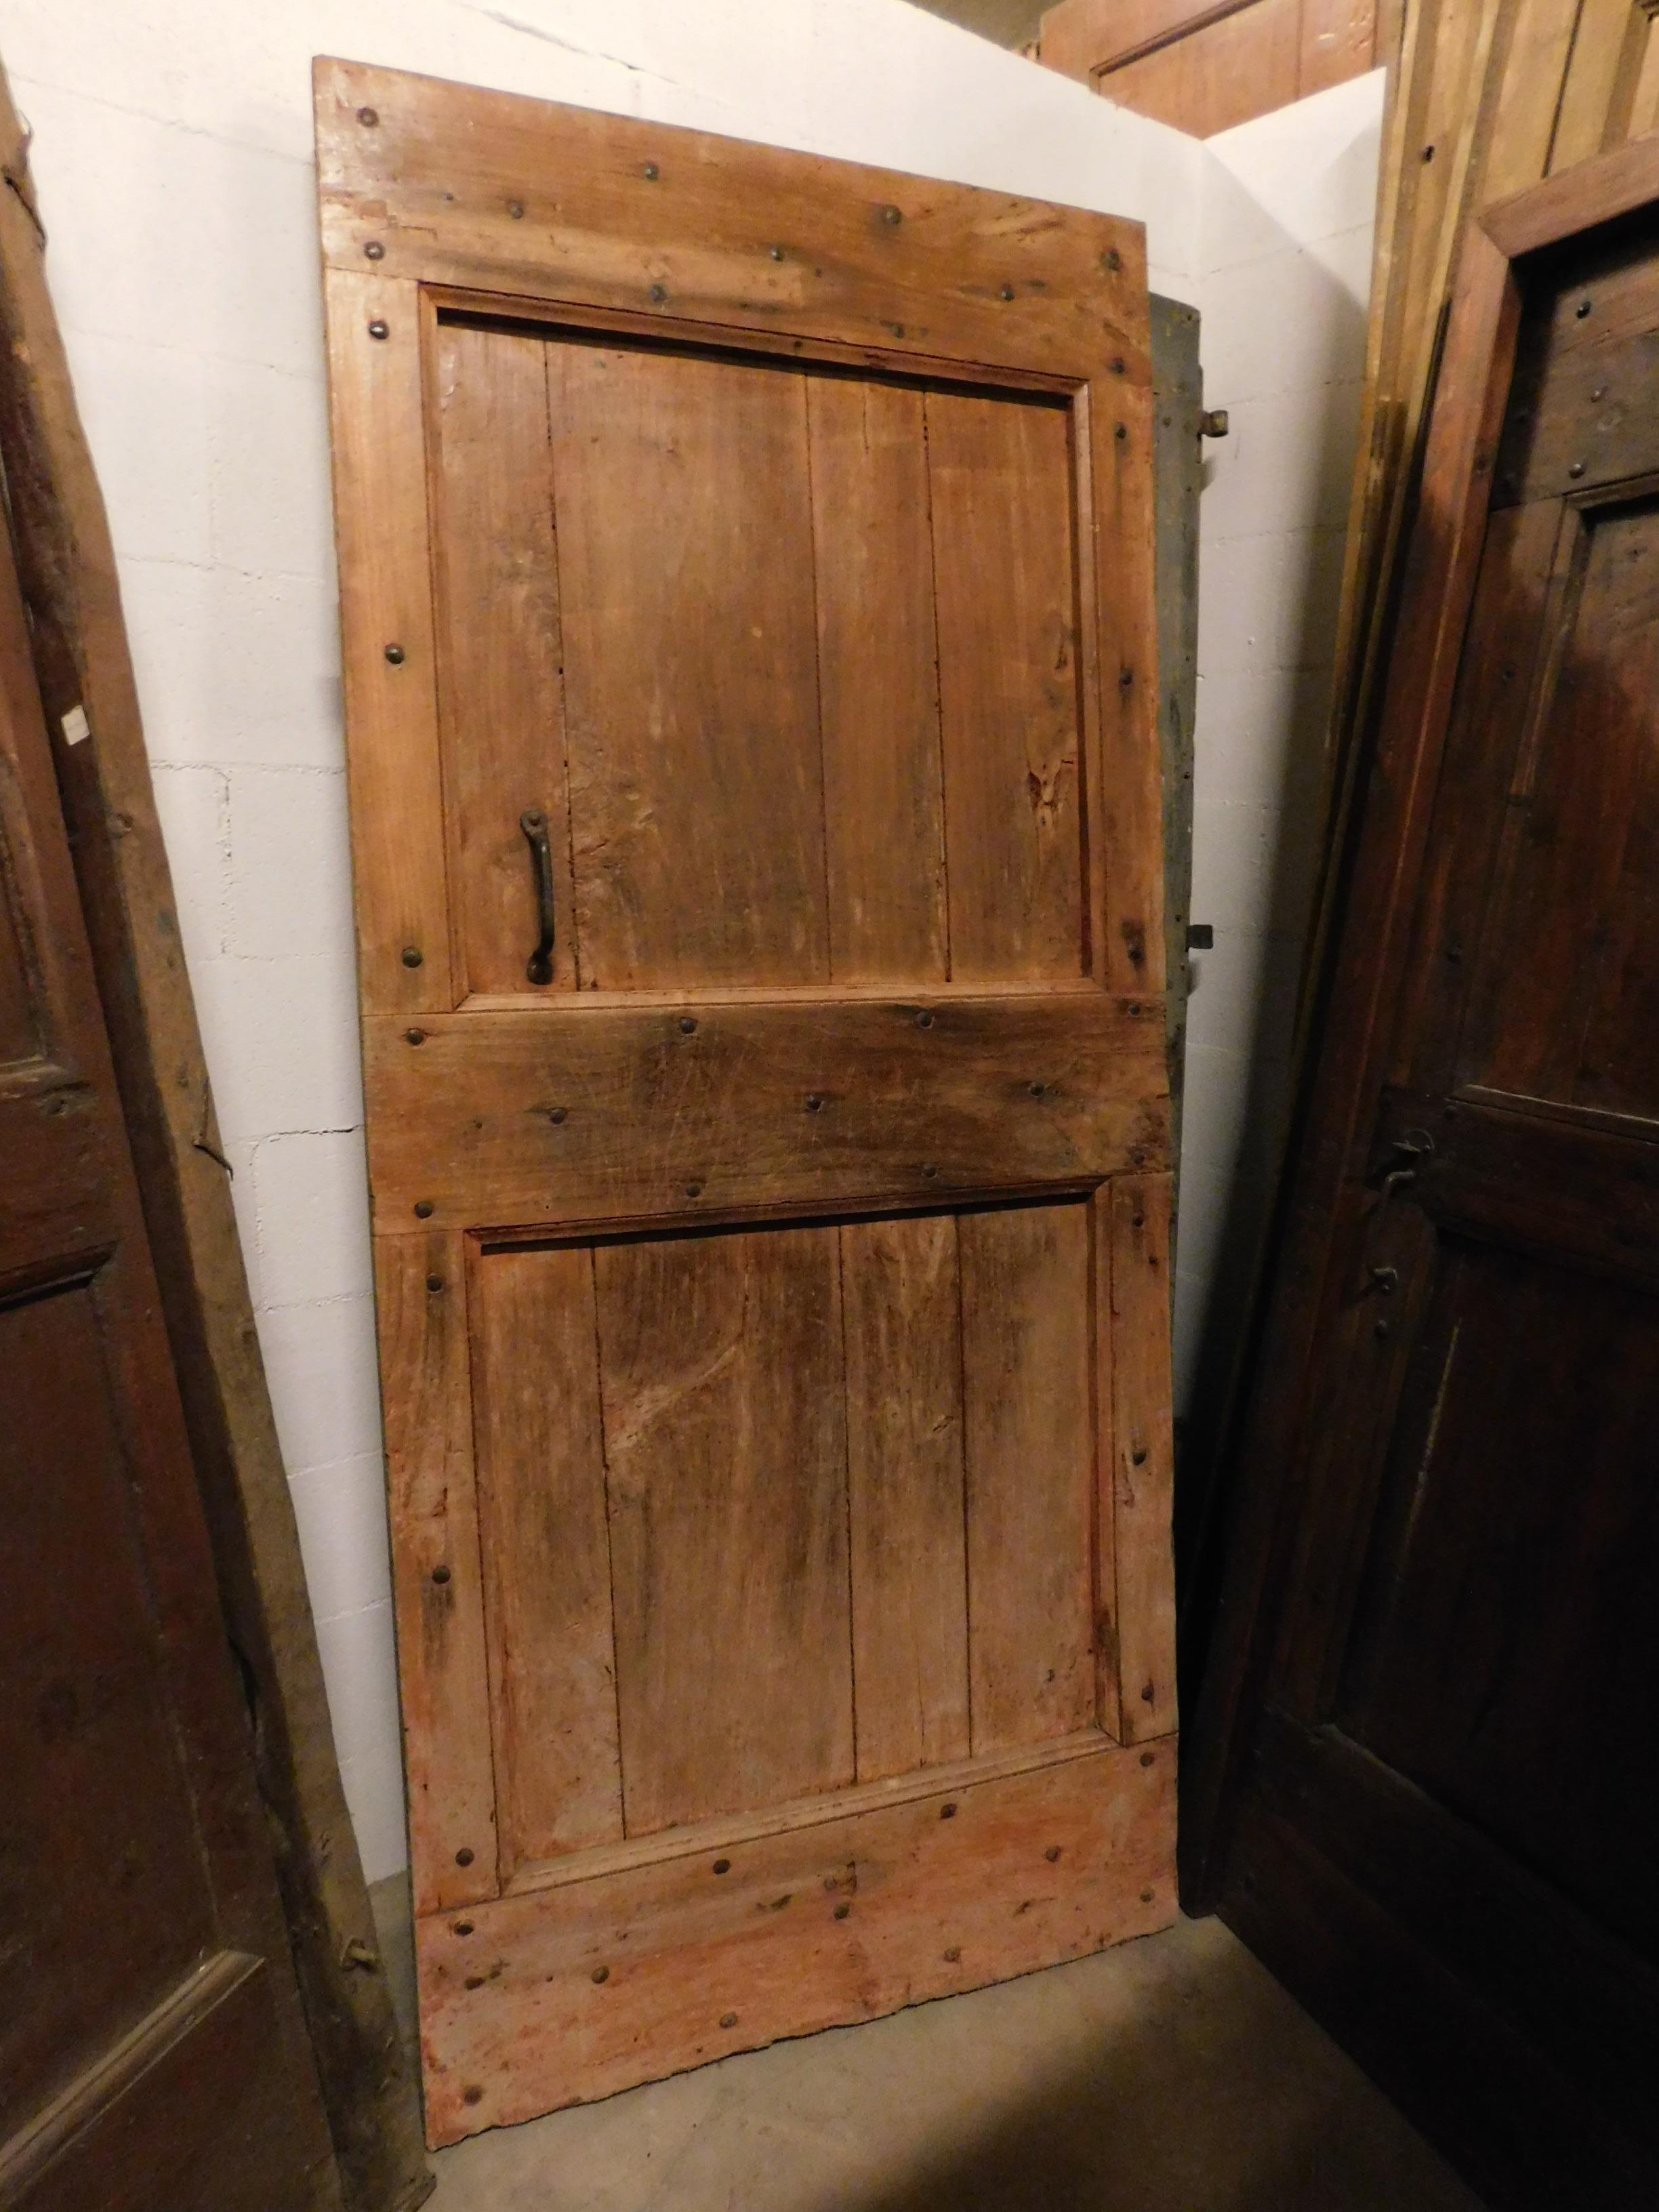 Antique rustic door in poplar, color of the poplar light wood tending to orange, beautiful patinated wood of the 19th century, hand-built for a farmhouse in northern Italy.
It was born as a cellar door, with original opening and irons to push with